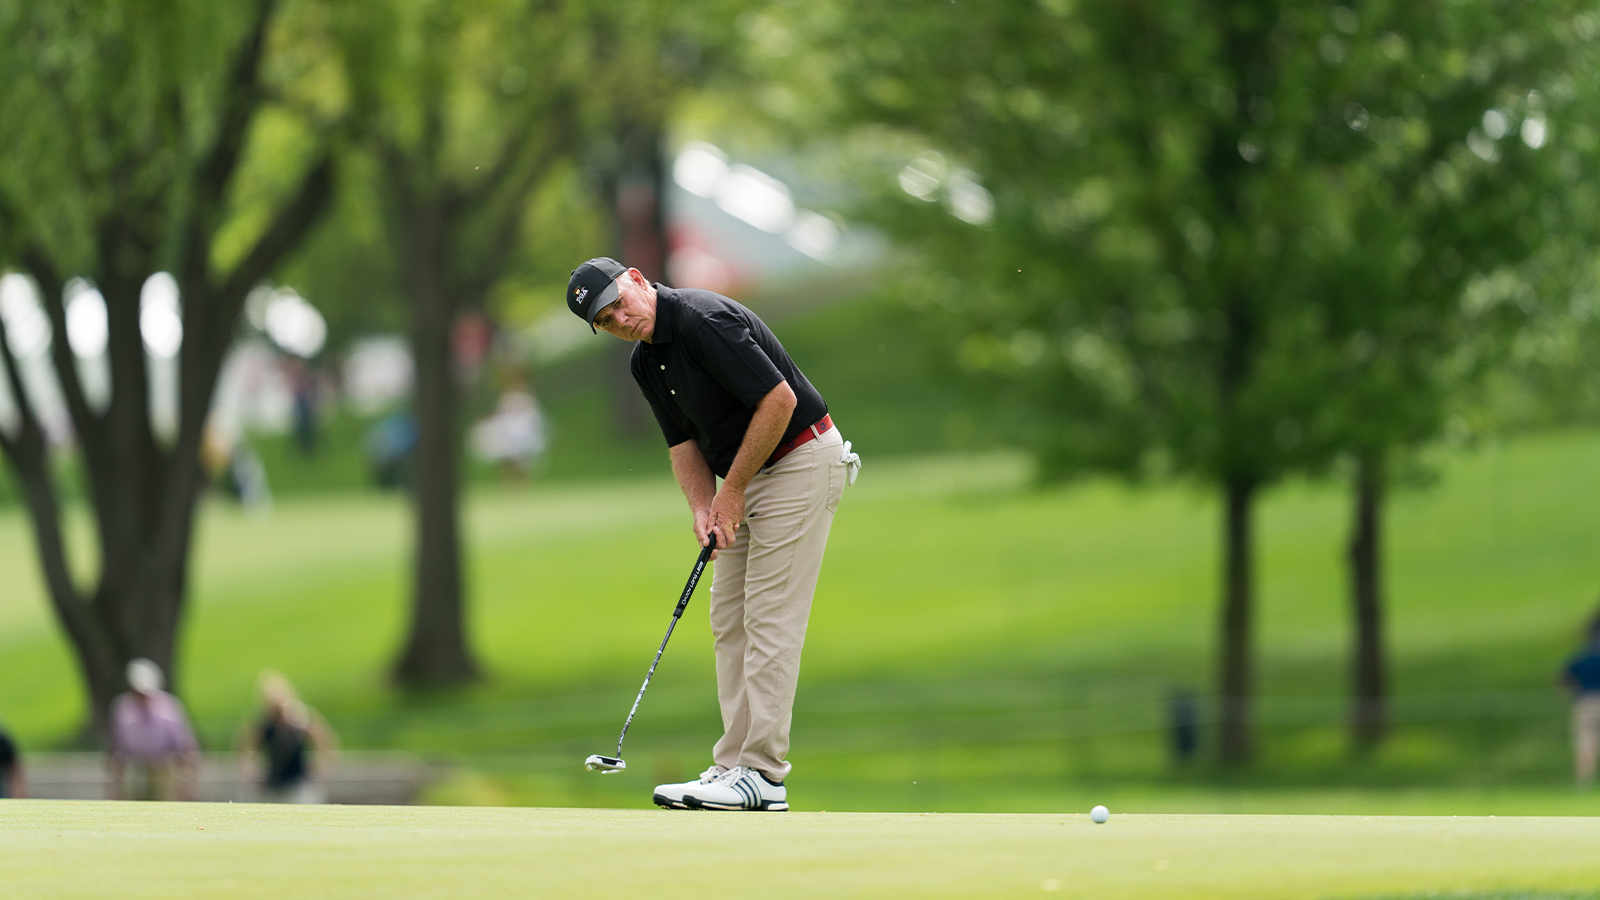 PGA Professional Brad Lardon makes his putt on the 10th hole during the first round for the 80th KitchenAid Senior PGA Championship held at Oak Hill Country Club on May 23, 2019 in Rochester, New York. (Photo by Montana Pritchard/PGA of America)